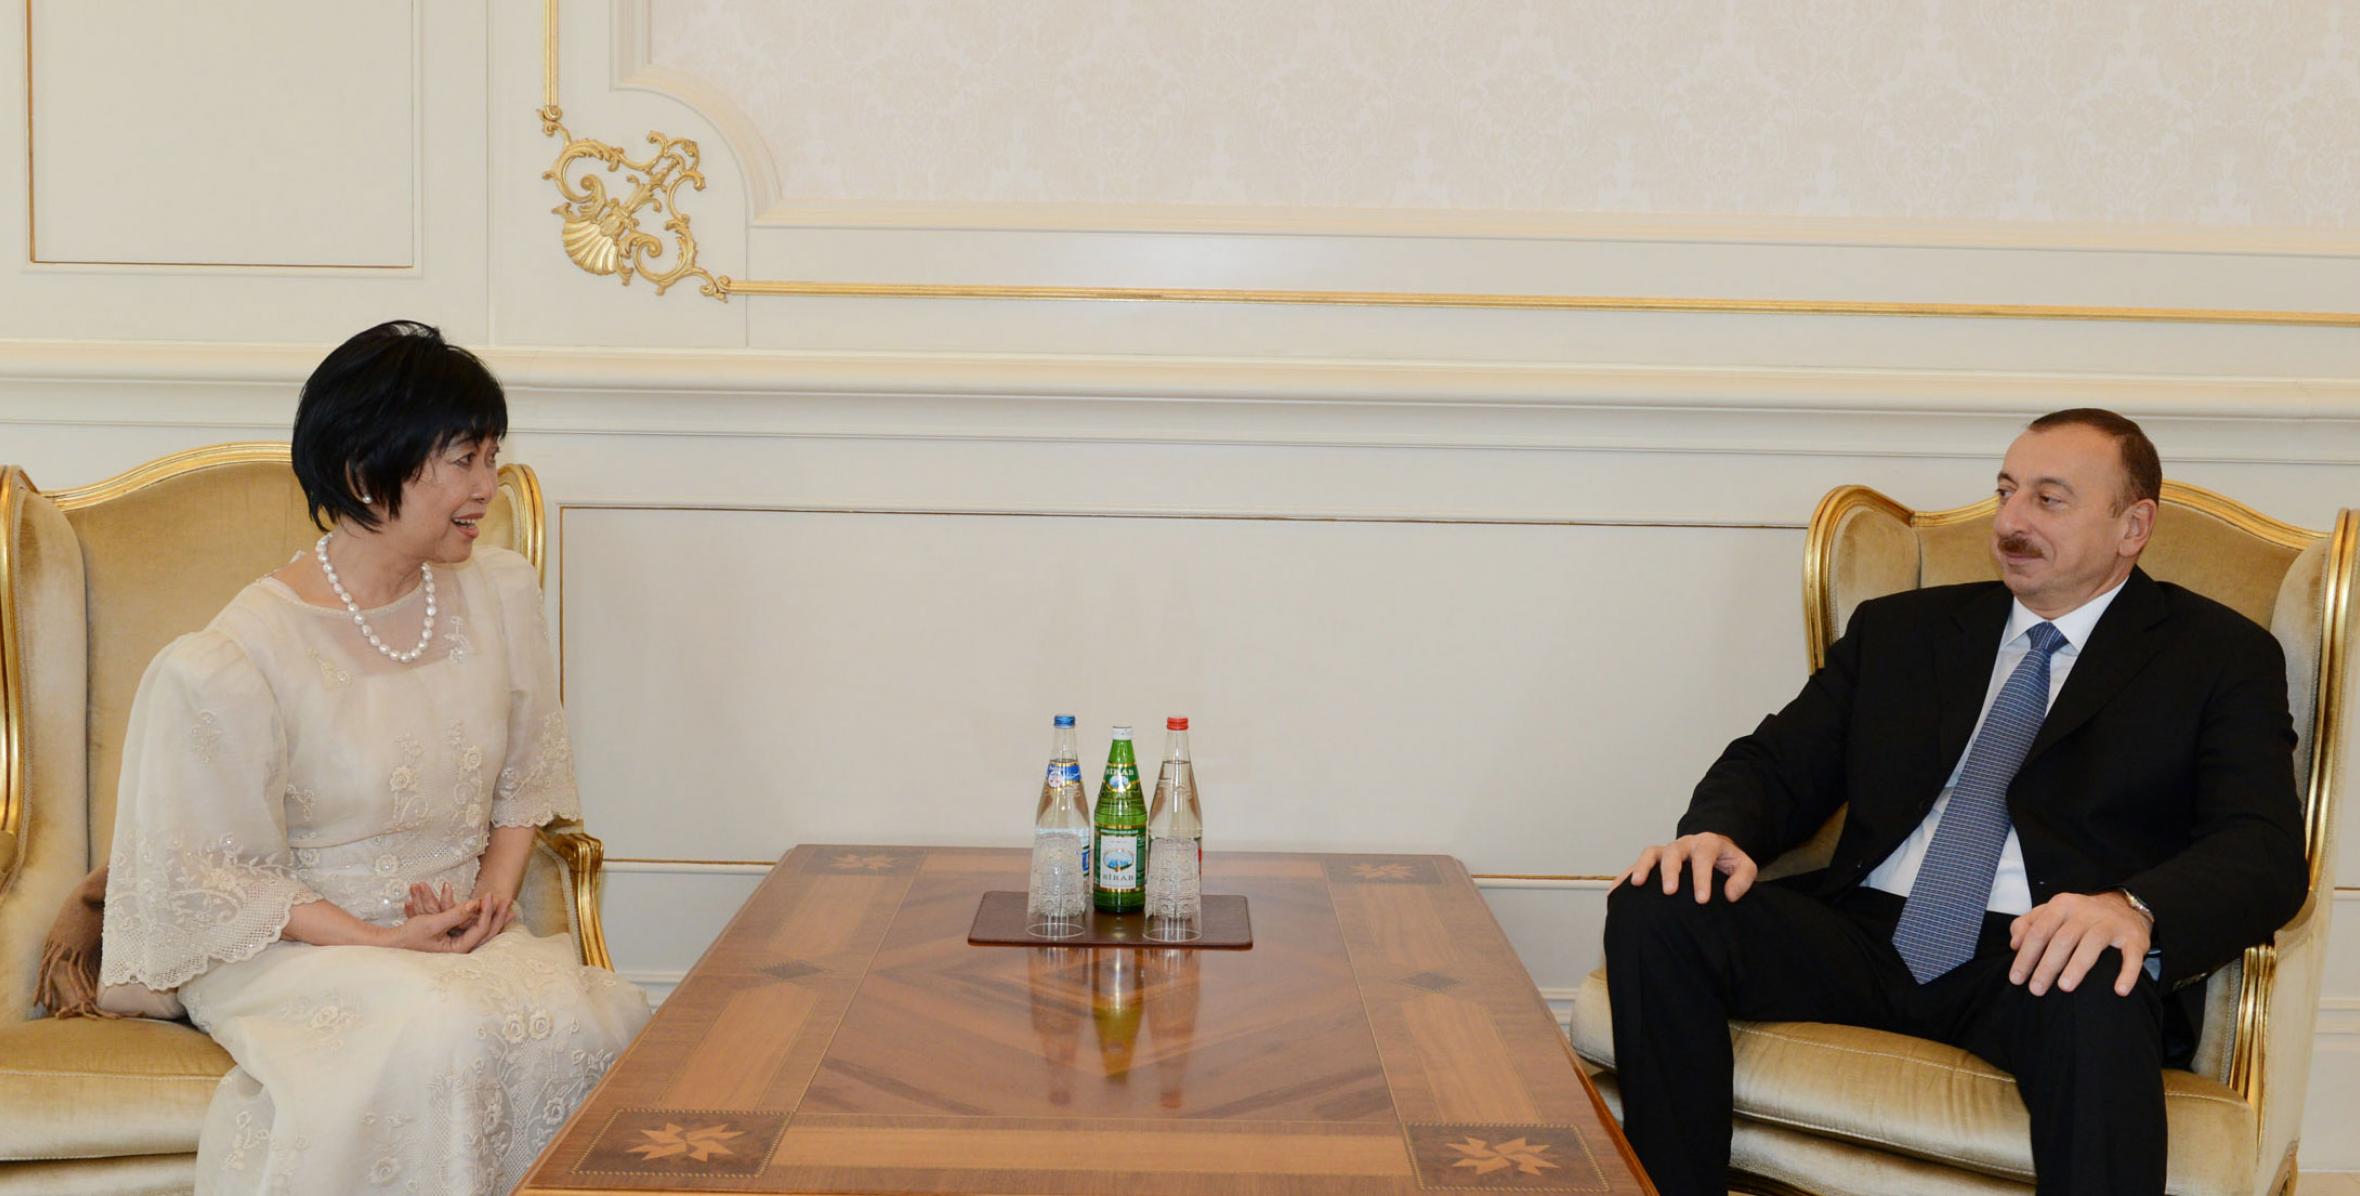 Ilham Aliyev accepted the credentials from the newly-appointed Ambassador of the Philippines to Azerbaijan